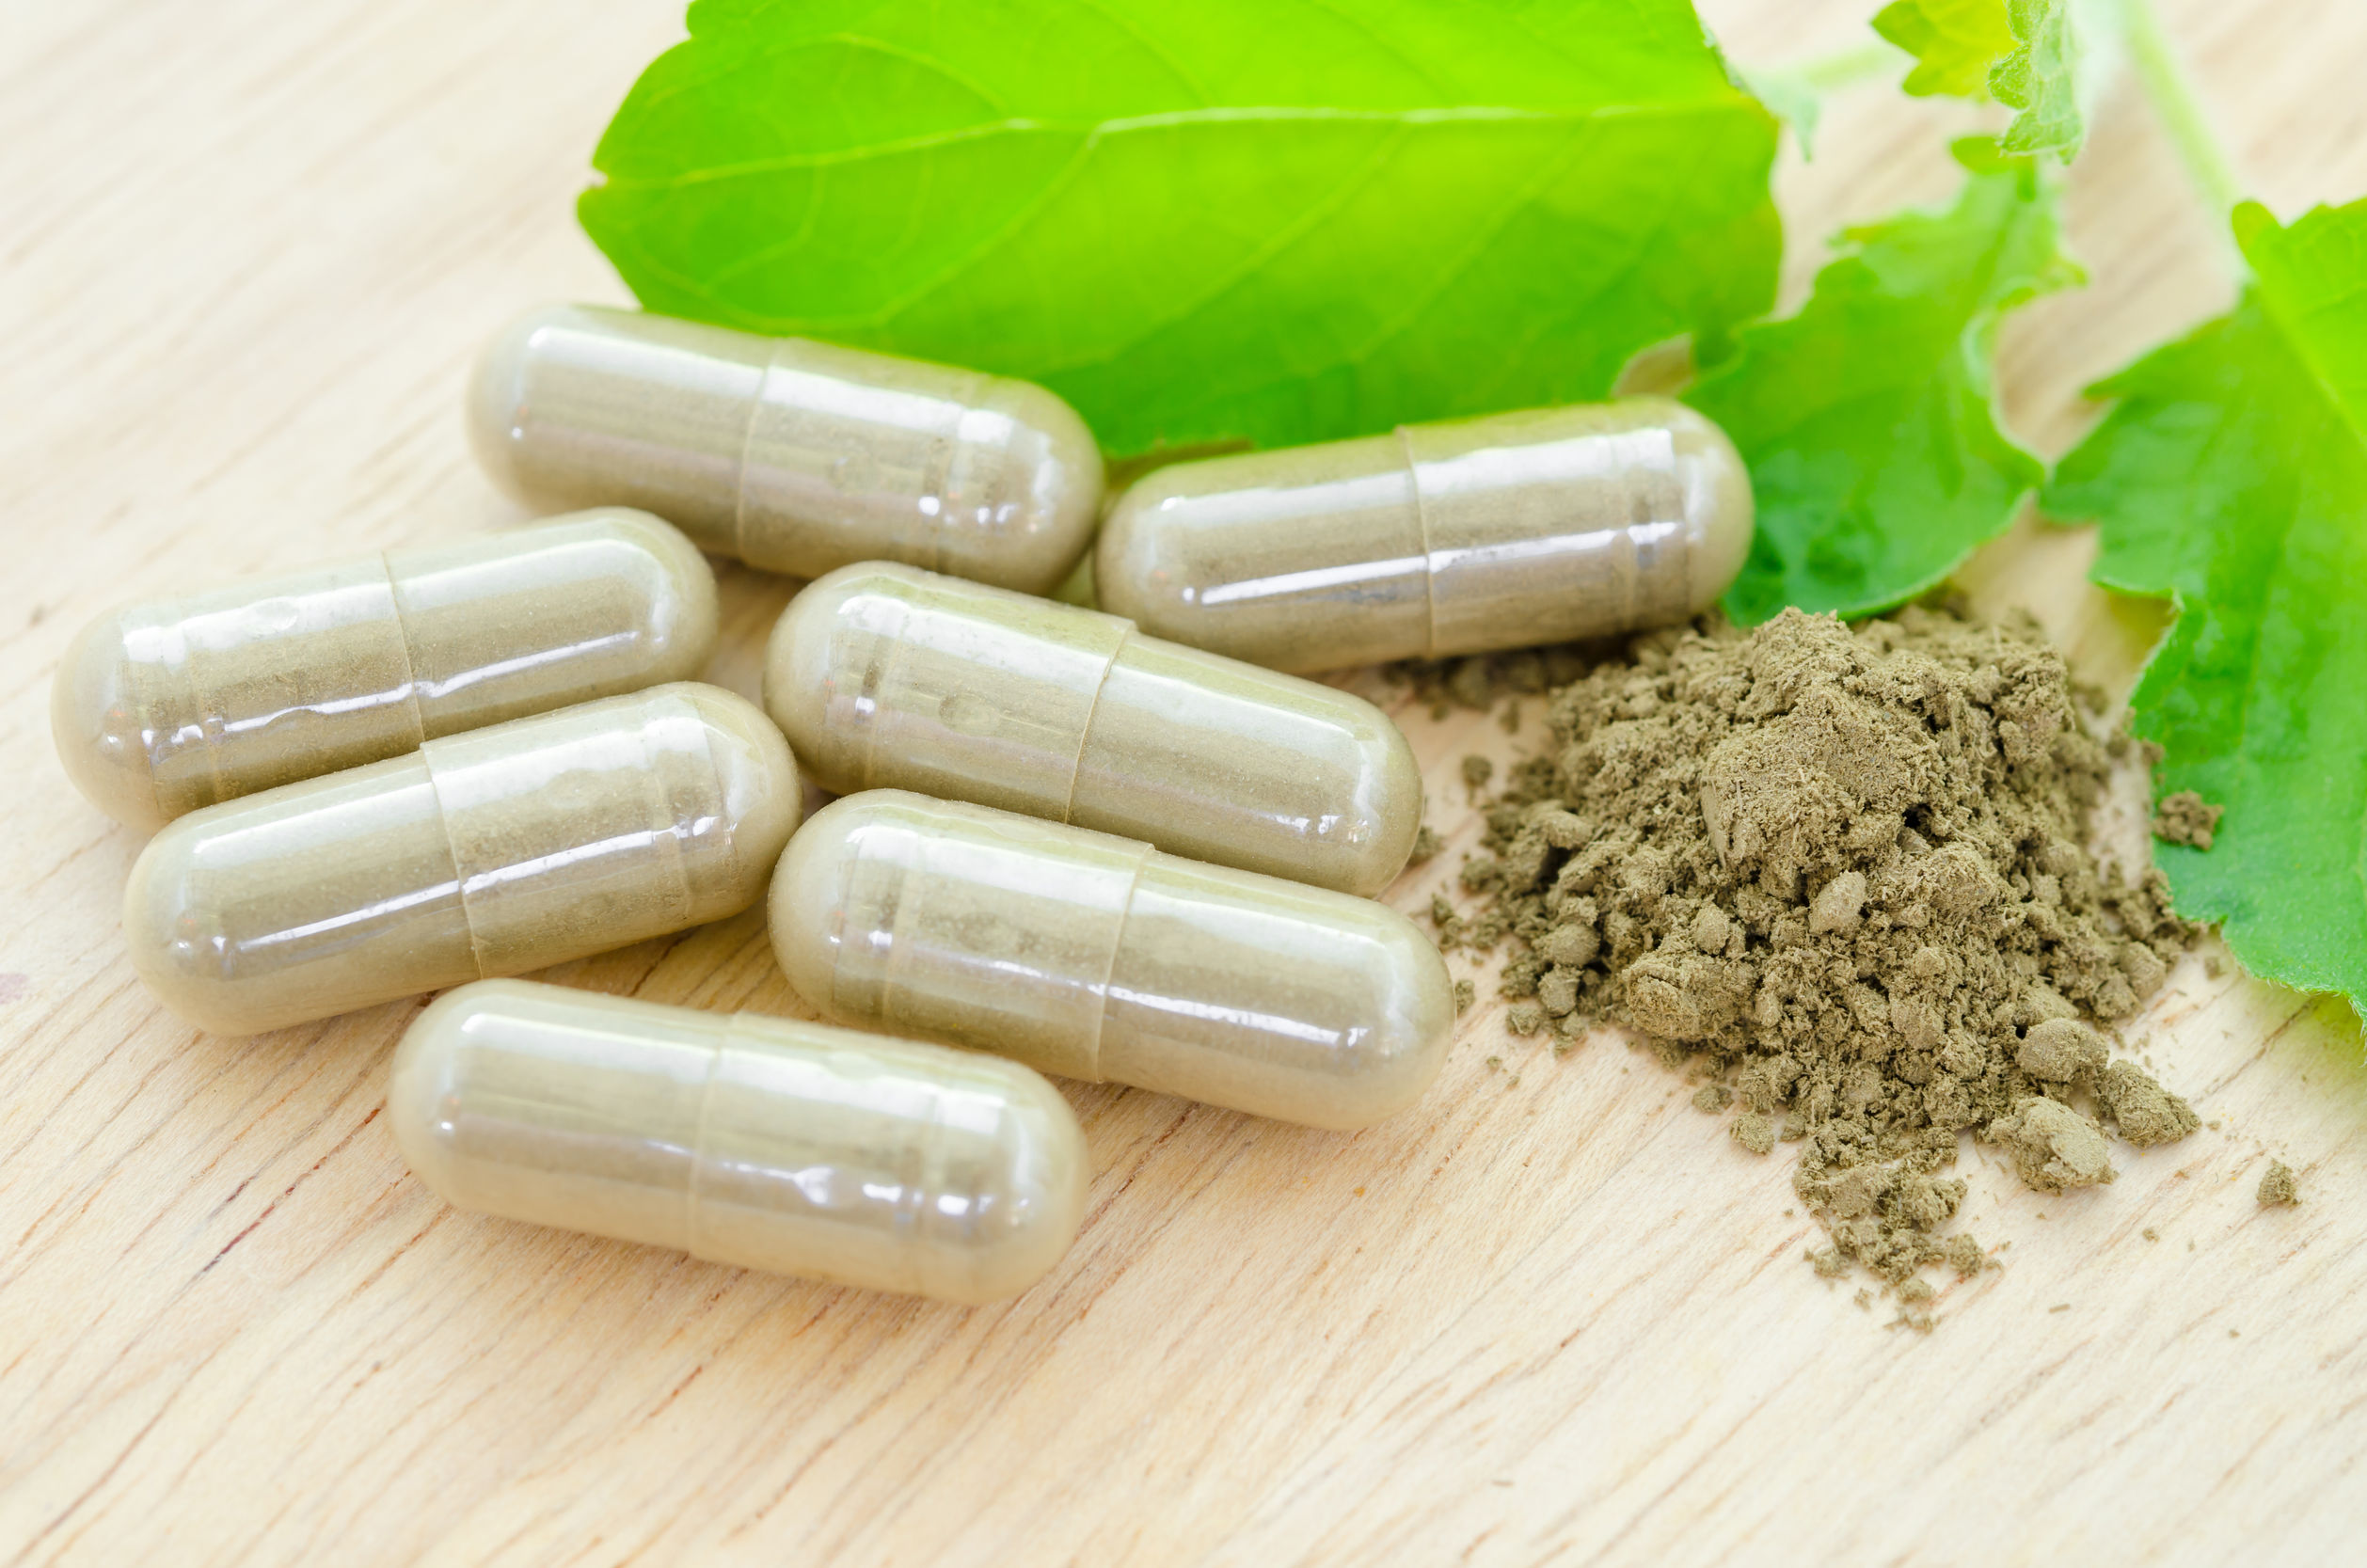 50243963 - herbal medicine capsules with green leaf on wooden background.